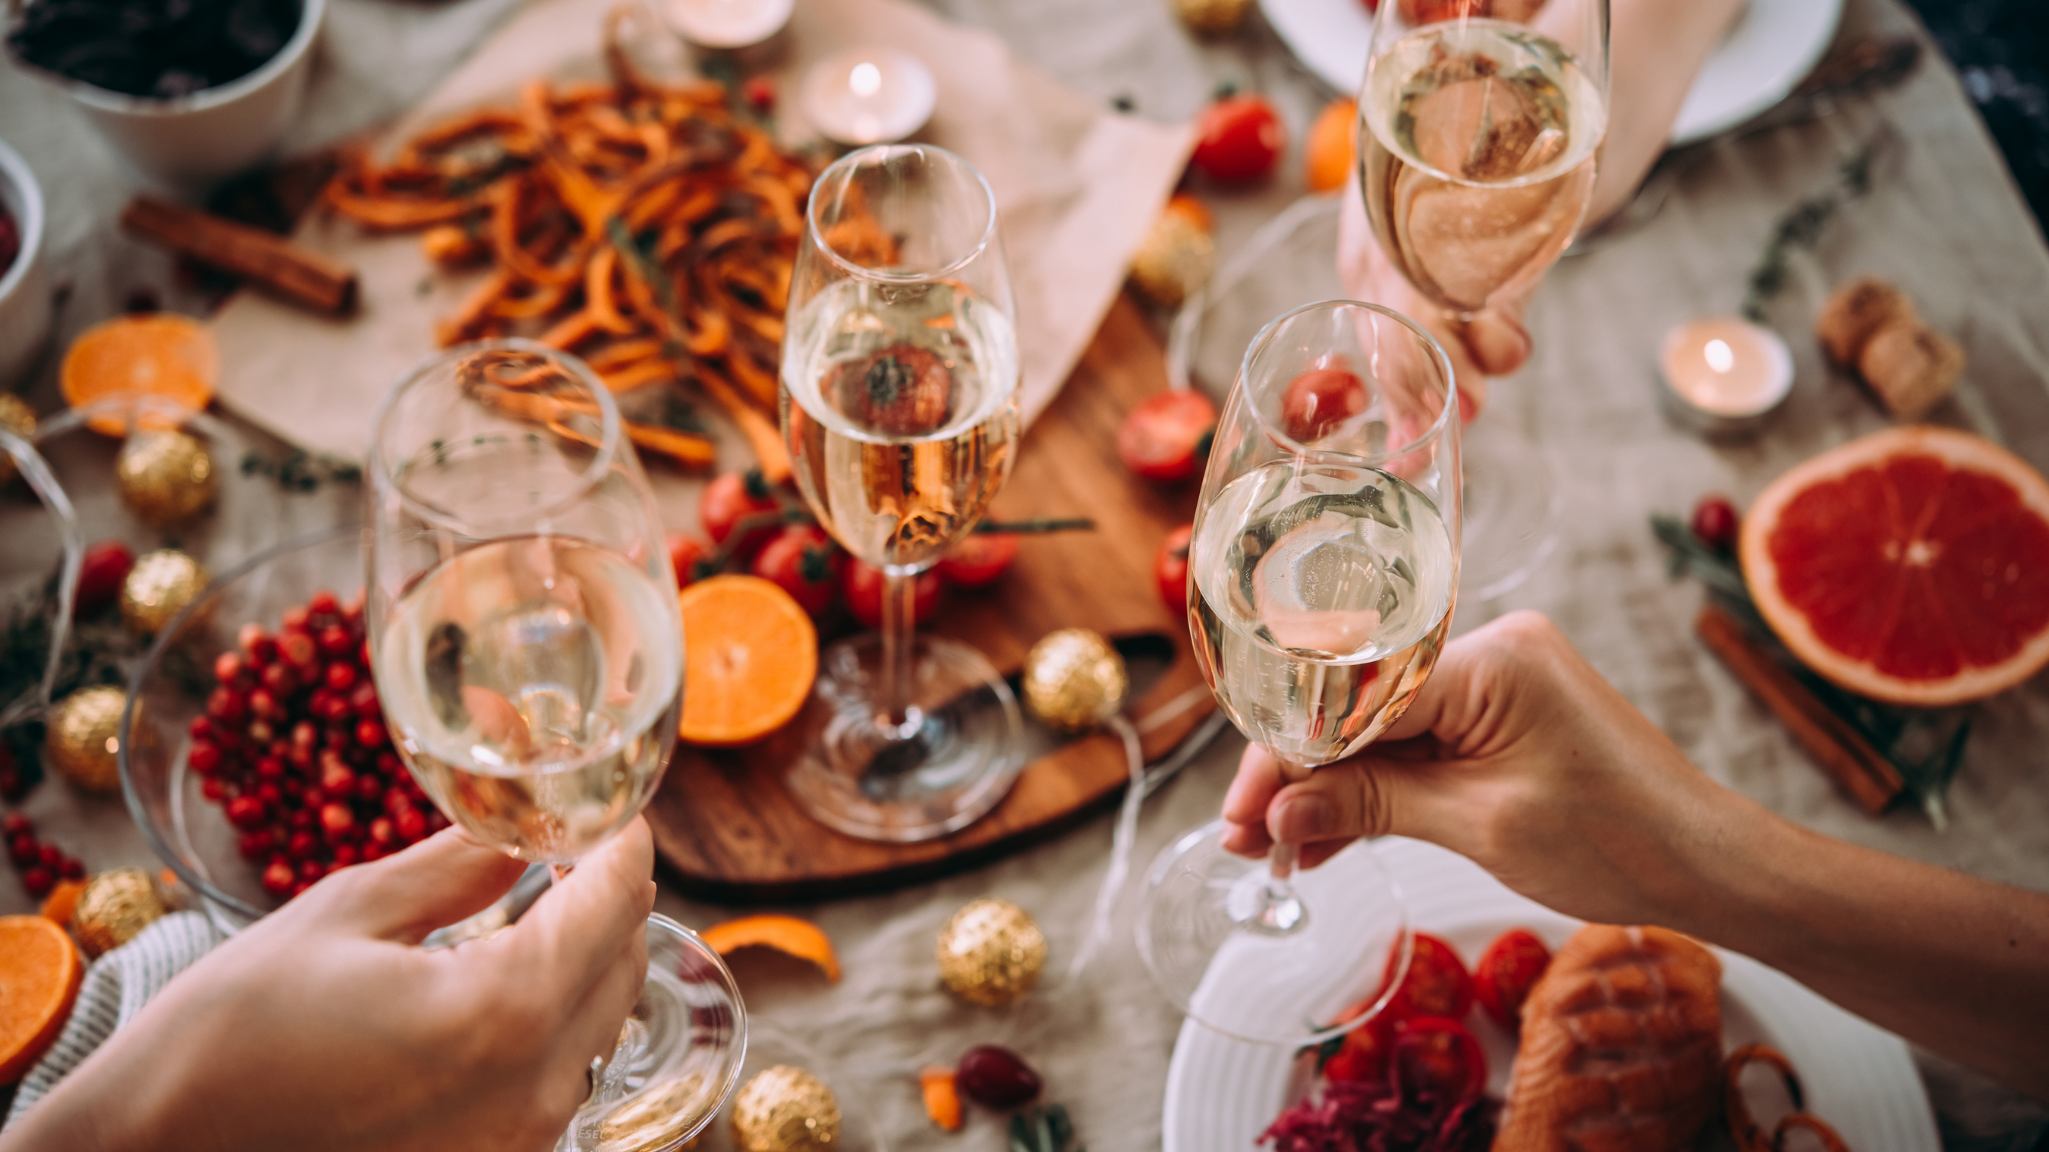 people cheers their champagne glasses over a table full of food and decorations